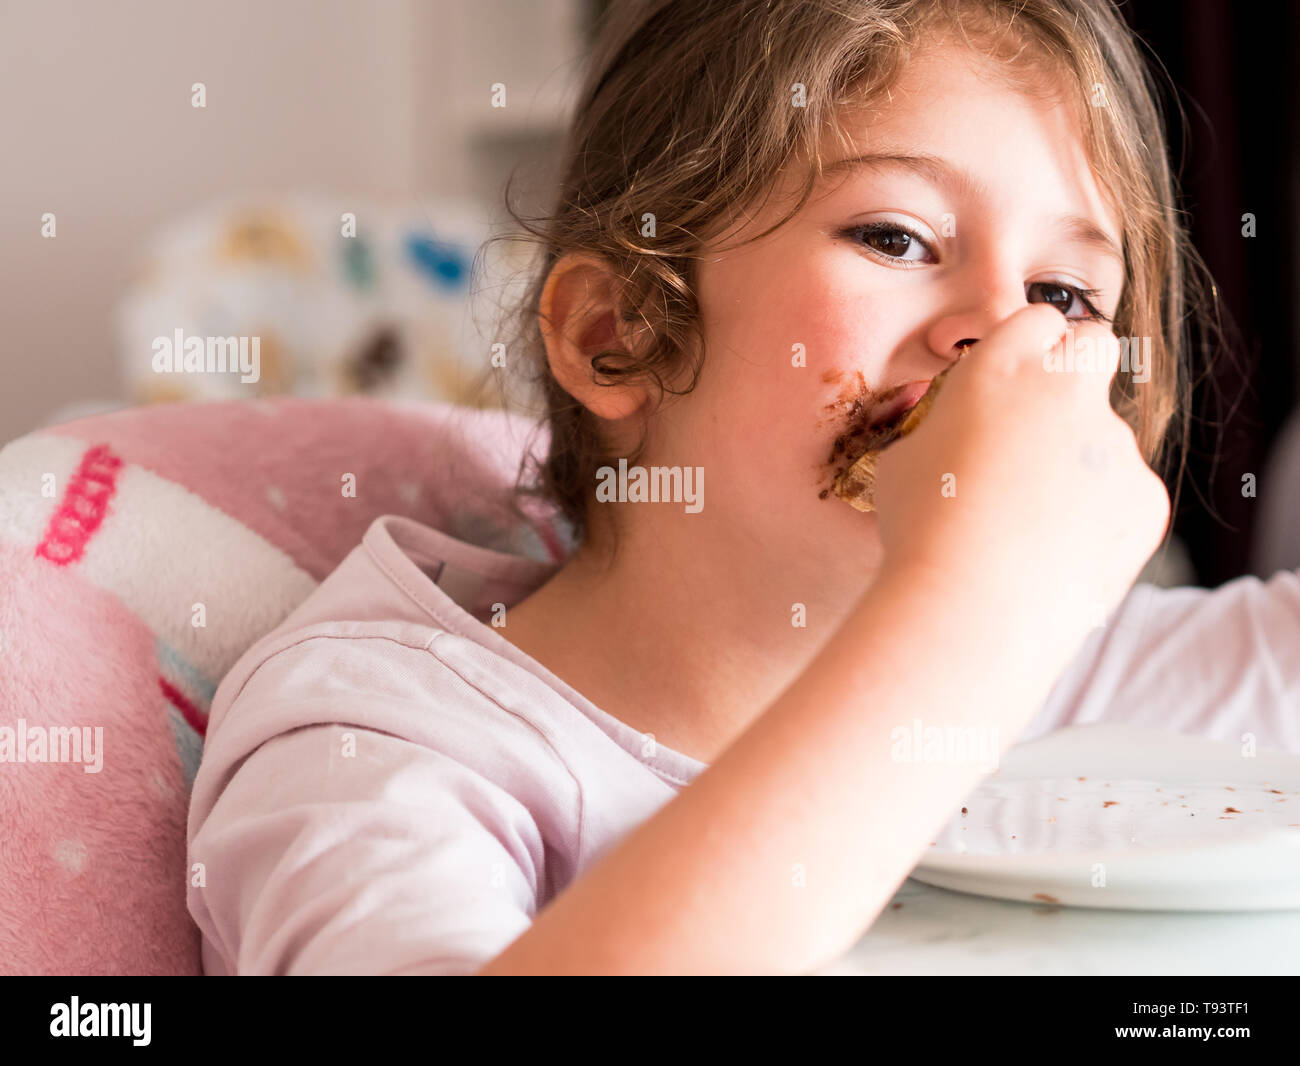 Small caucasian girl with long hair messy eating chocolate Stock Photo